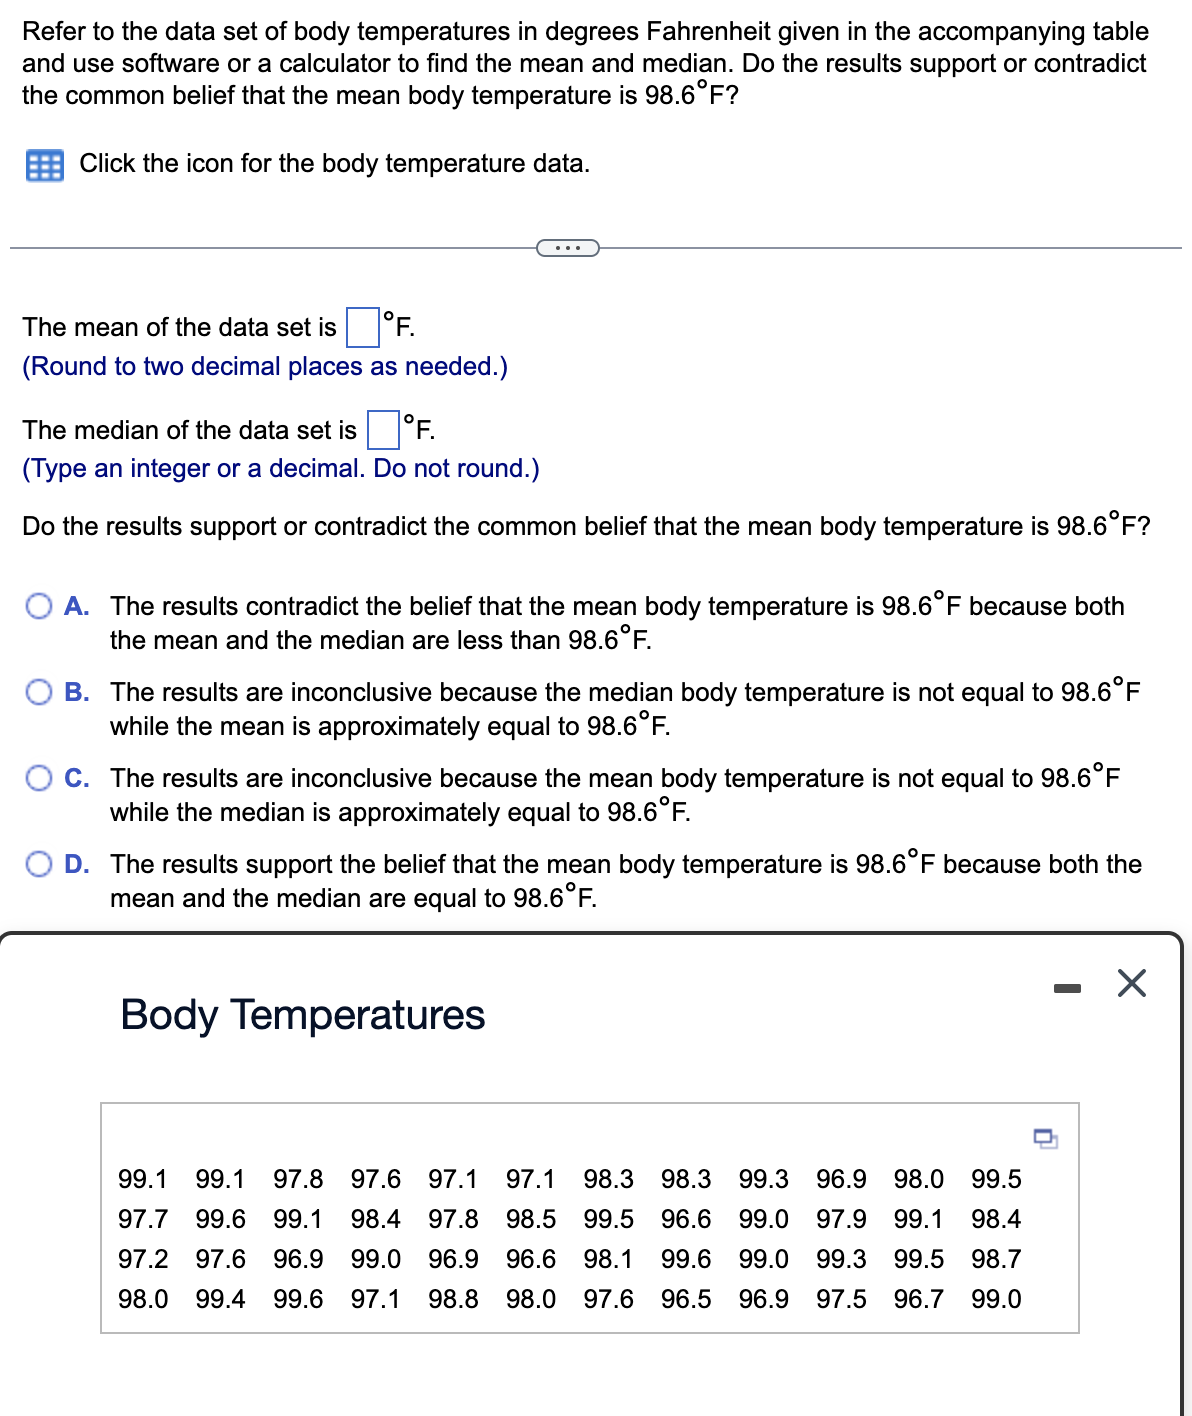 Refer to the data set of body temperatures in degrees Fahrenheit given in the accompanying table
and use software or a calculator to find the mean and median. Do the results support or contradict
the common belief that the mean body temperature is 98.6°F?
Click the icon for the body temperature data.
The mean of the data set is
°F.
(Round to two decimal places as needed.)
The median of the data set is
°F.
(Type an integer or a decimal. Do not round.)
Do the results support or contradict the common belief that the mean body temperature is 98.6°F?
O A. The results contradict the belief that the mean body temperature is 98.6°F because both
the mean and the median are less than 98.6°F.
B. The results are inconclusive because the median body temperature is not equal to 98.6°F
while the mean is approximately equal to 98.6°F.
C. The results are inconclusive because the mean body temperature is not equal to 98.6°F
while the median is approximately equal to 98.6°F.
O D. The results support the belief that the mean body temperature is 98.6°F because both the
mean and the median are equal to 98.6°F.
Body Temperatures
99.1 99.1 97.8 97.6 97.1 97.1 98.3 98.3 99.3 96.9 98.0 99.5
97.7 99.6 99.1 98.4 97.8 98.5 99.5 96.6 99.0 97.9 99.1 98.4
97.2 97.6 96.9 99.0 96.9 96.6 98.1 99.6 99.0 99.3 99.5 98.7
98.0 99.4 99.6 97.1 98.8 98.0 97.6 96.5 96.9 97.5 96.7 99.0
0
X